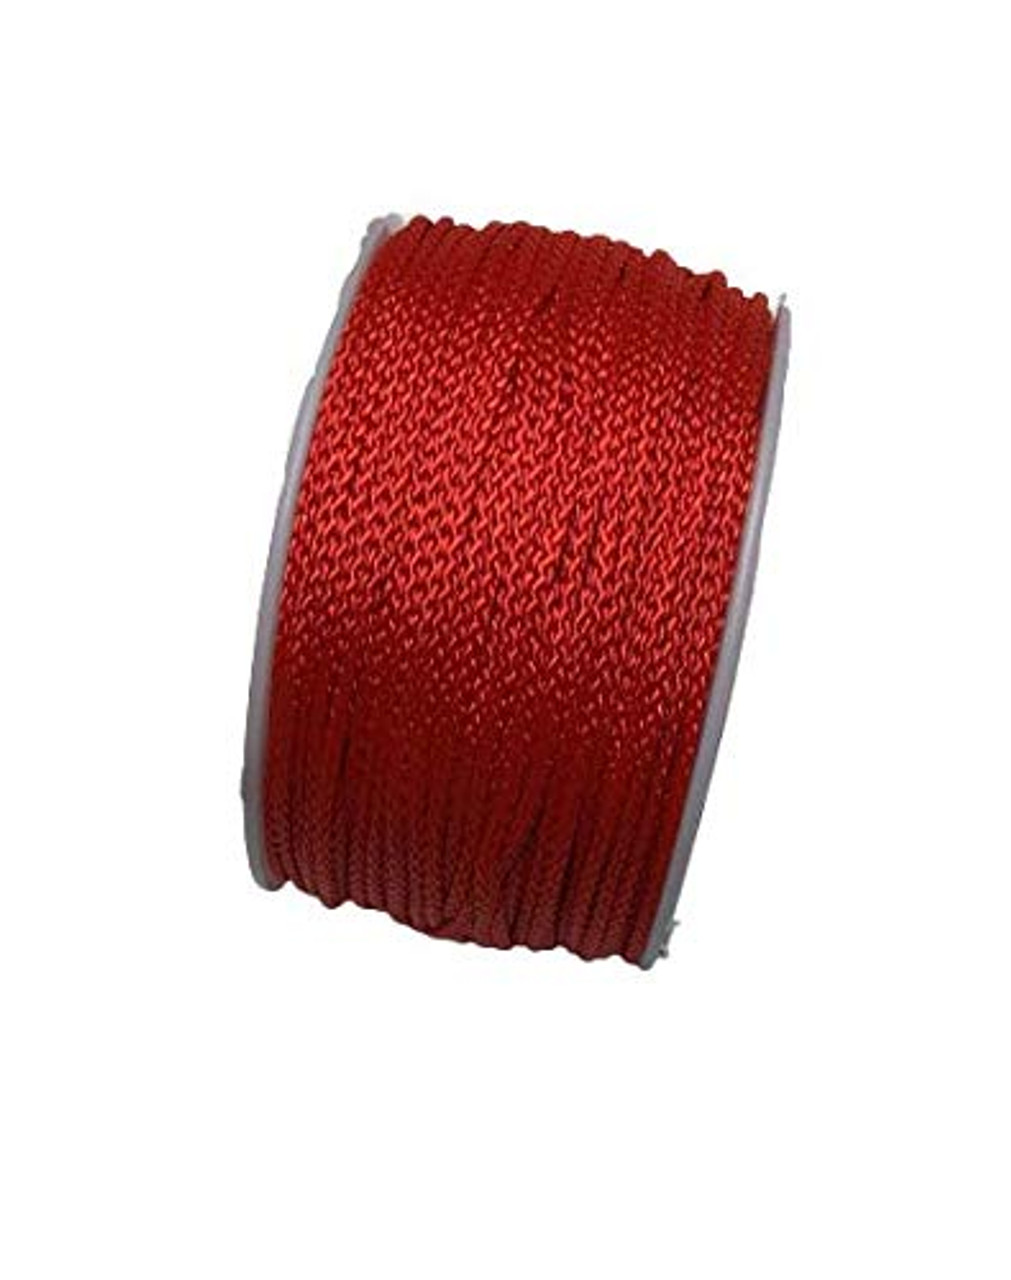 US Ropes Tactical Nylon Micro Cord 1.18mm X 125ft Lightweight Braided Cord  (3/64 Diameter) on Spool Camping Boating Home Fishing Garden Jewelry 90lb  Test Breaking Load (Red) - US Stainless